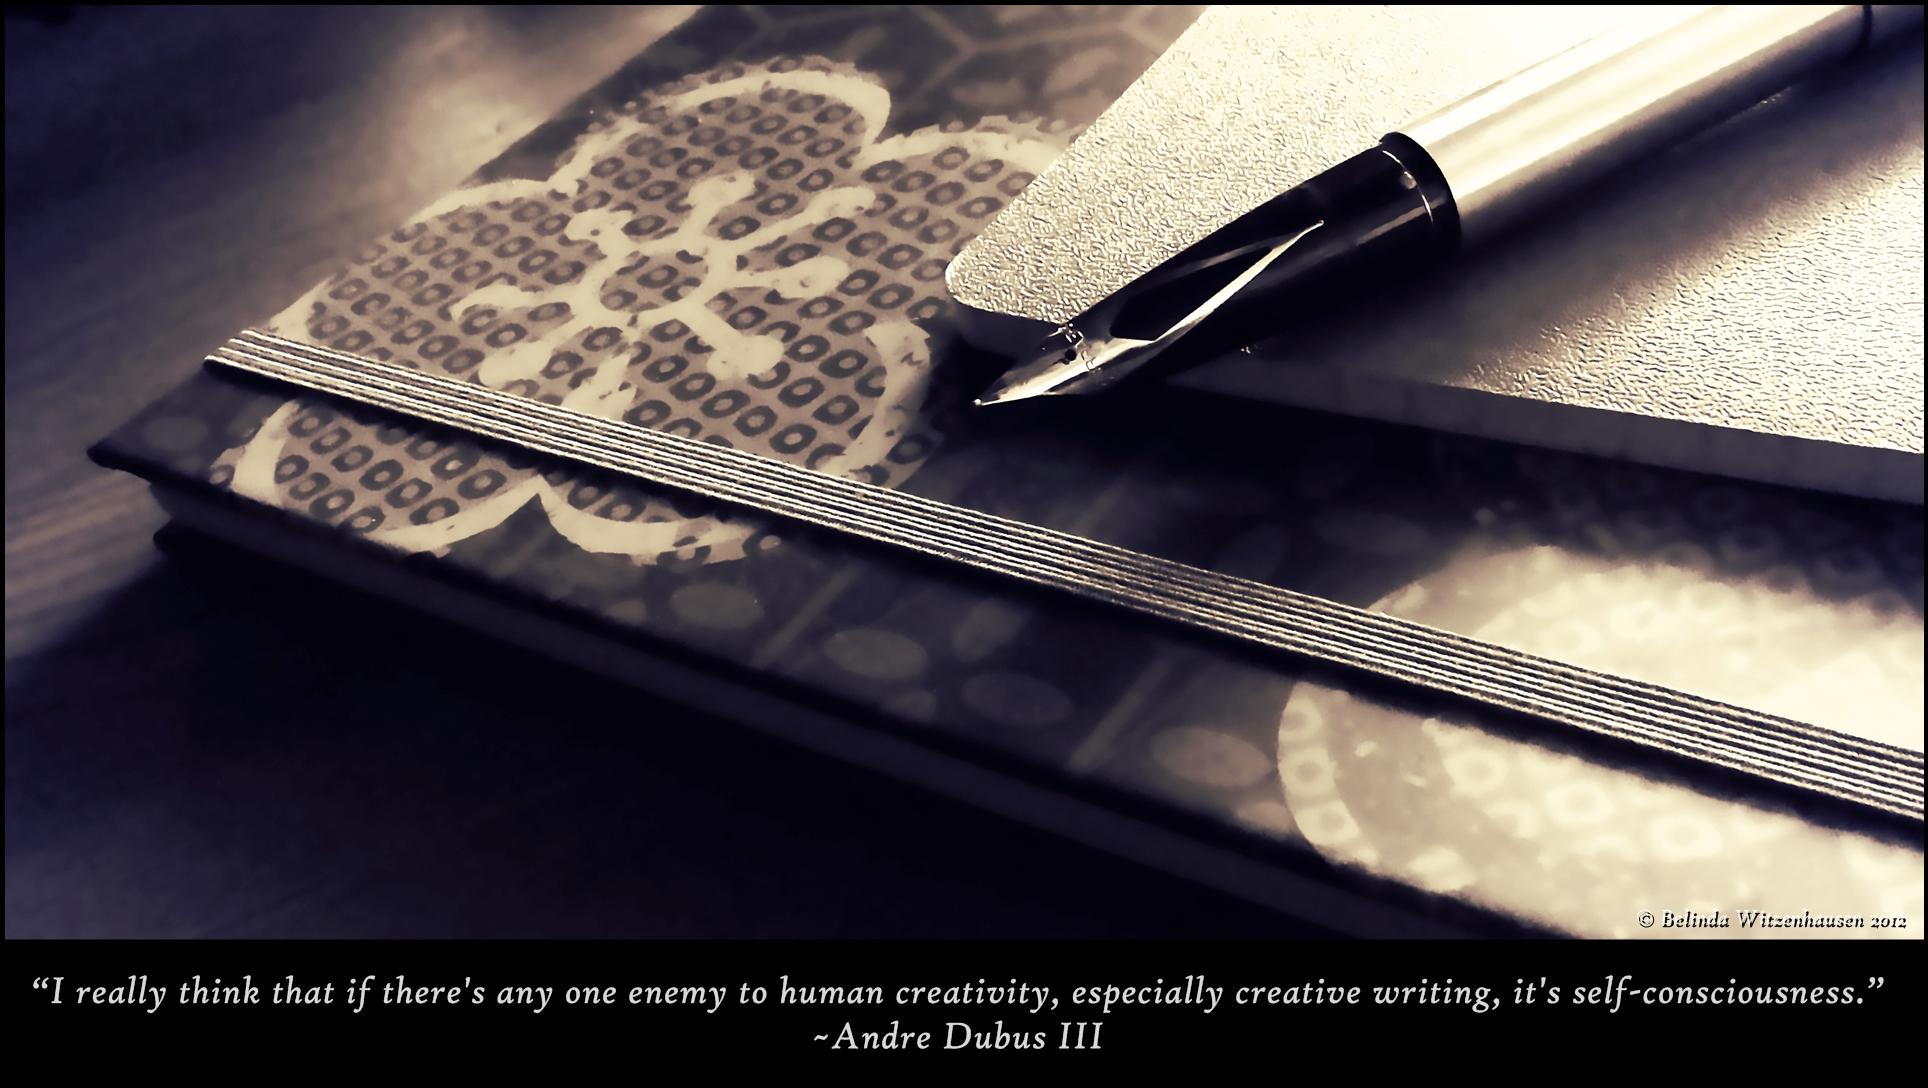 writing wallpaper,pen,fountain pen,material property,calligraphy,writing instrument accessory